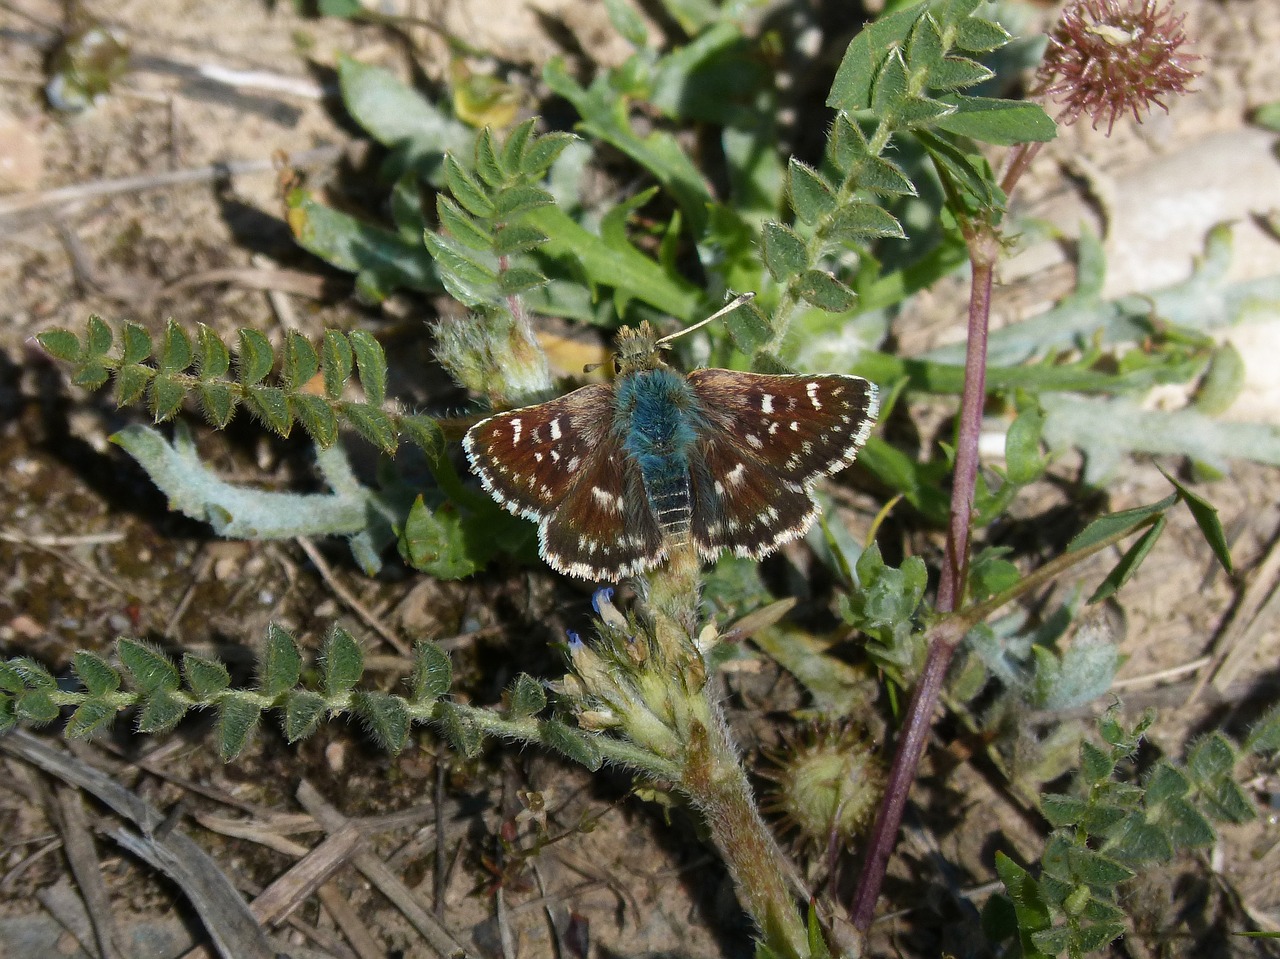 grizzled armoricanus butterfly merlet free photo